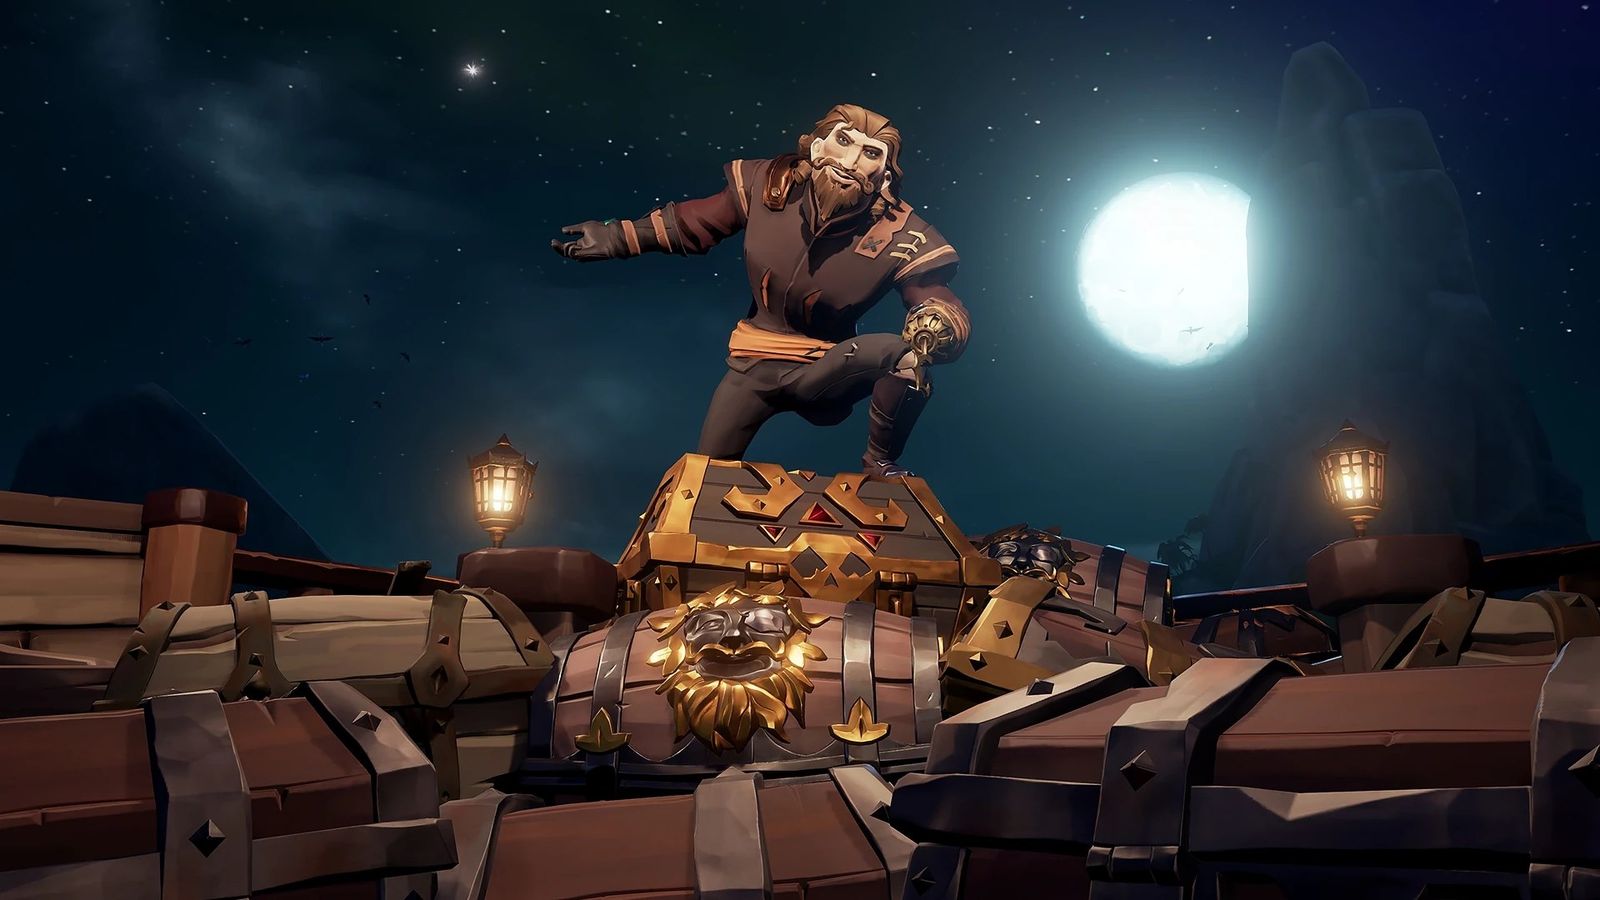 sea of thieves ach laden standing over lots of treasure chests buried in pile